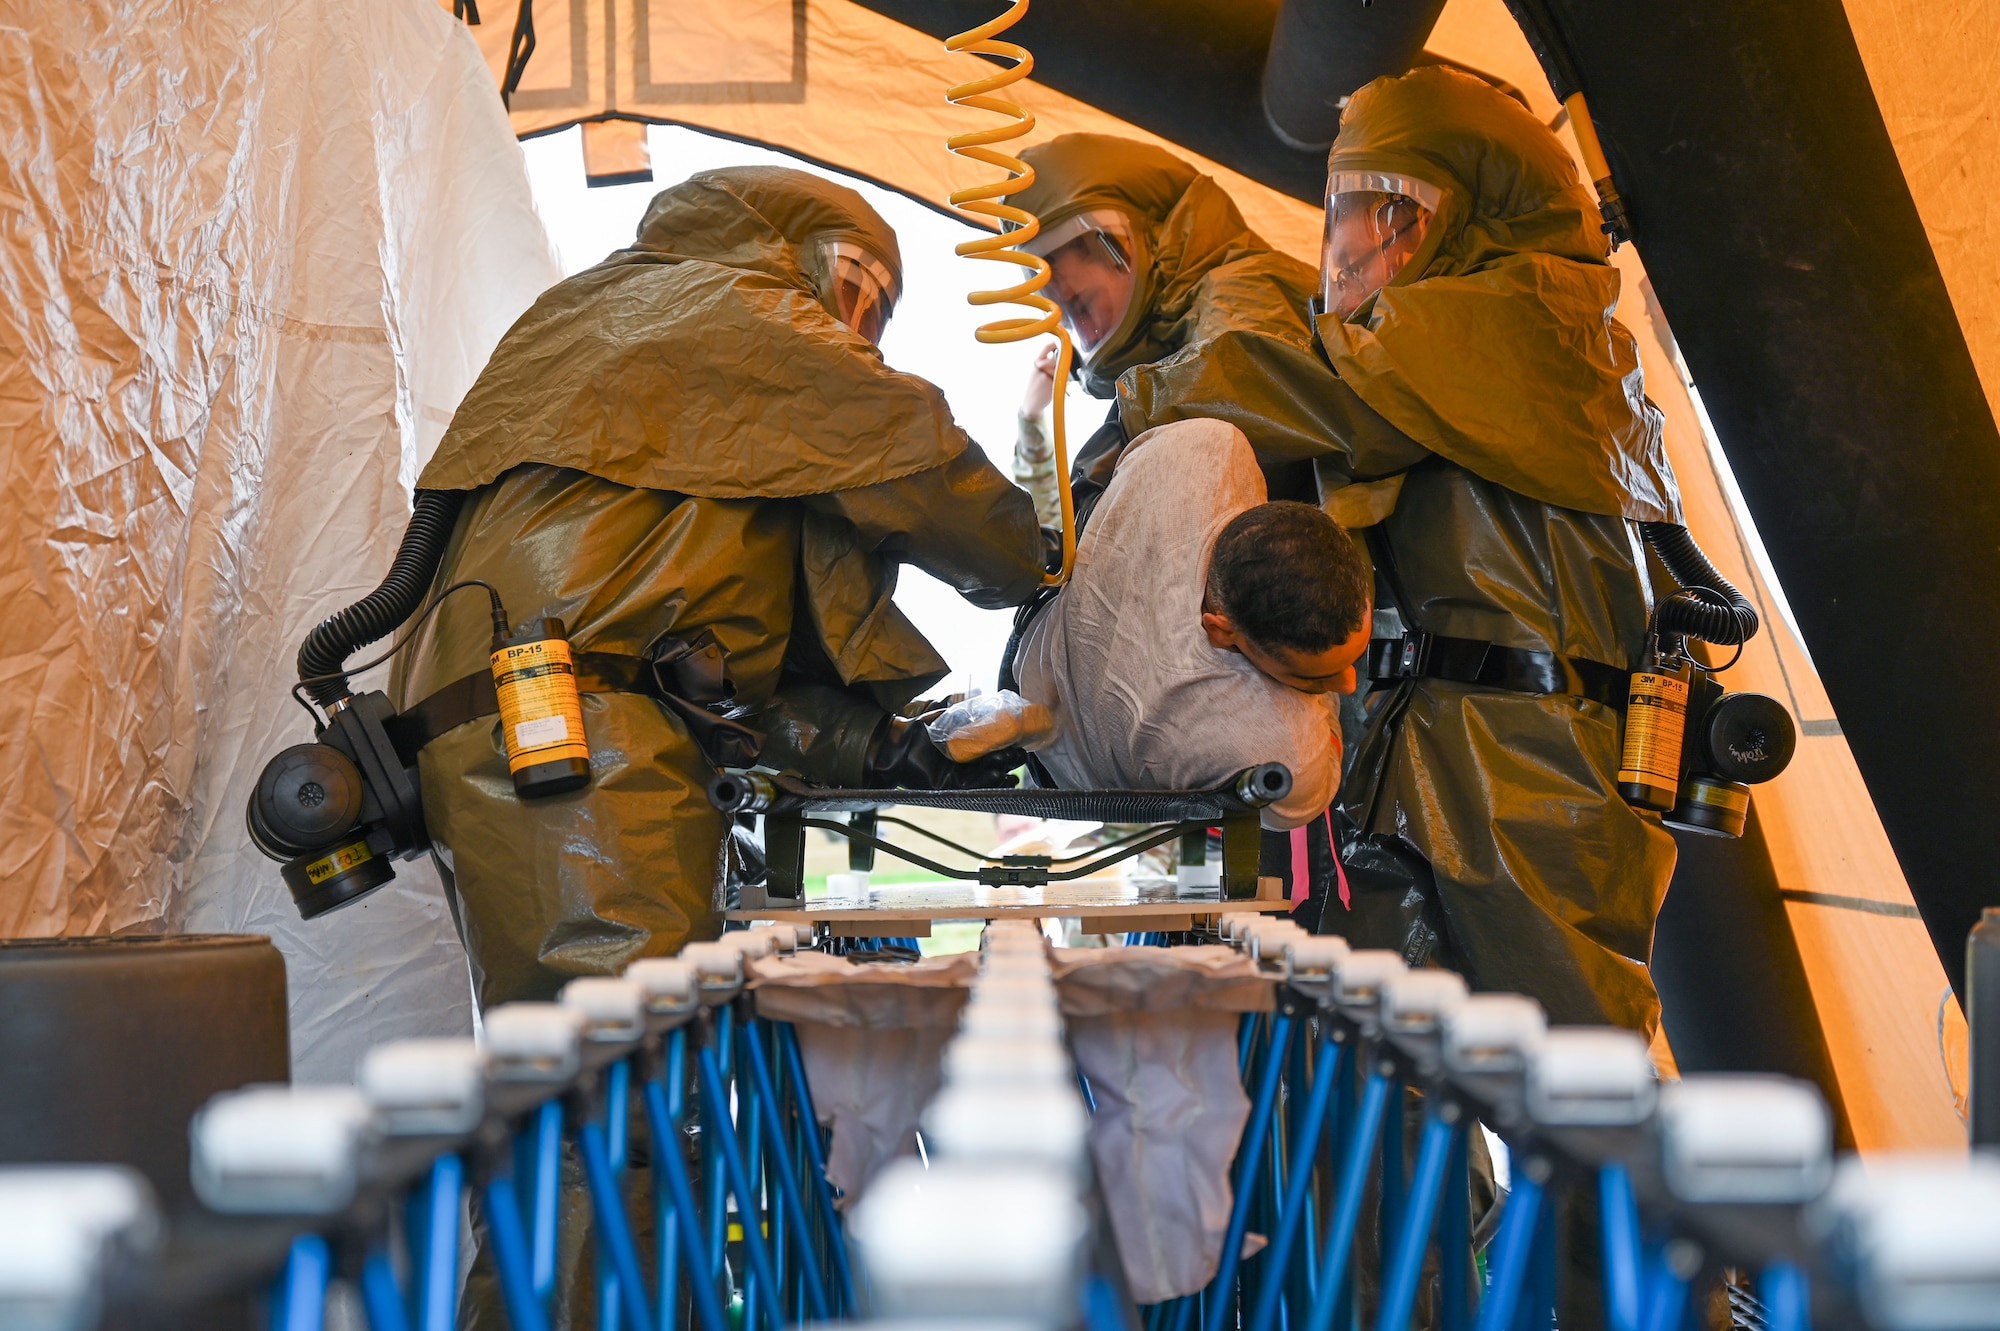 Medical Airmen from the 341st Medical Group decontaminate a simulated casualty during Ready EAGLE II, a training exercise held biennially at Malmstrom Air Force Base, Mont., Sept. 21, 2023. Ready EAGLE II is a medical readiness contract providing training on triage, decontamination, treatment and patient tracking skills. (U.S. Air Force photo by Senior Airman Breanna Christopher Volkmar)